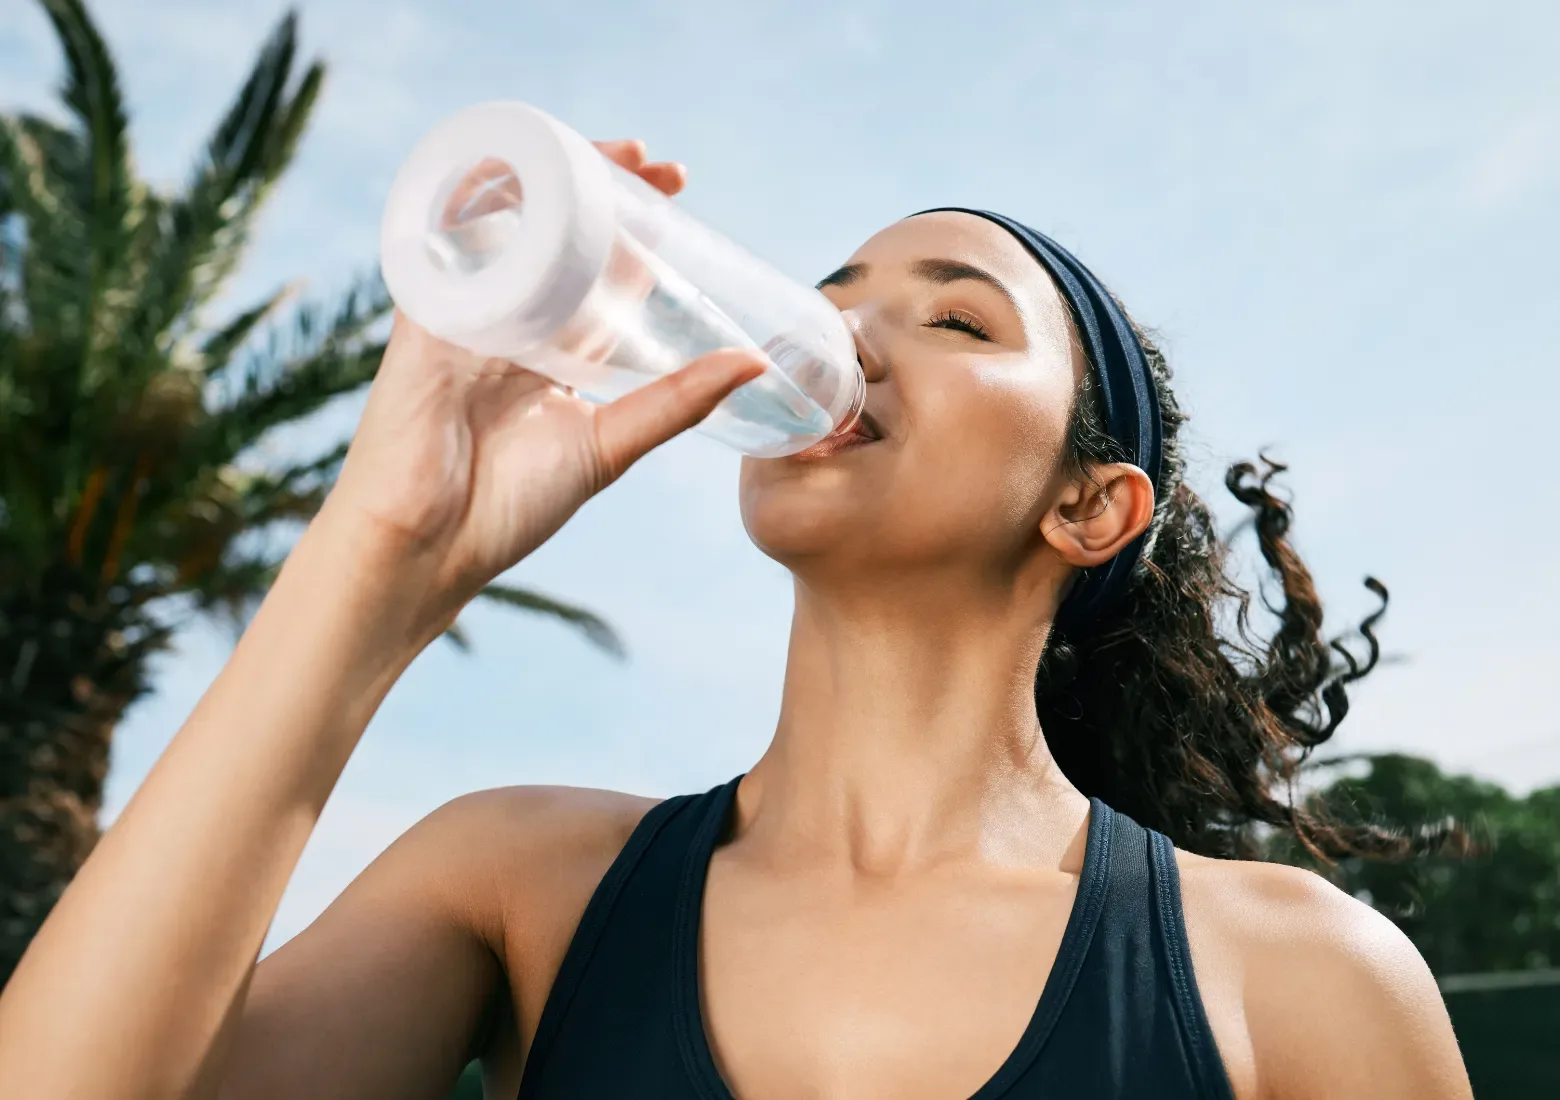 Woman drinking water to stay cool while she's outside